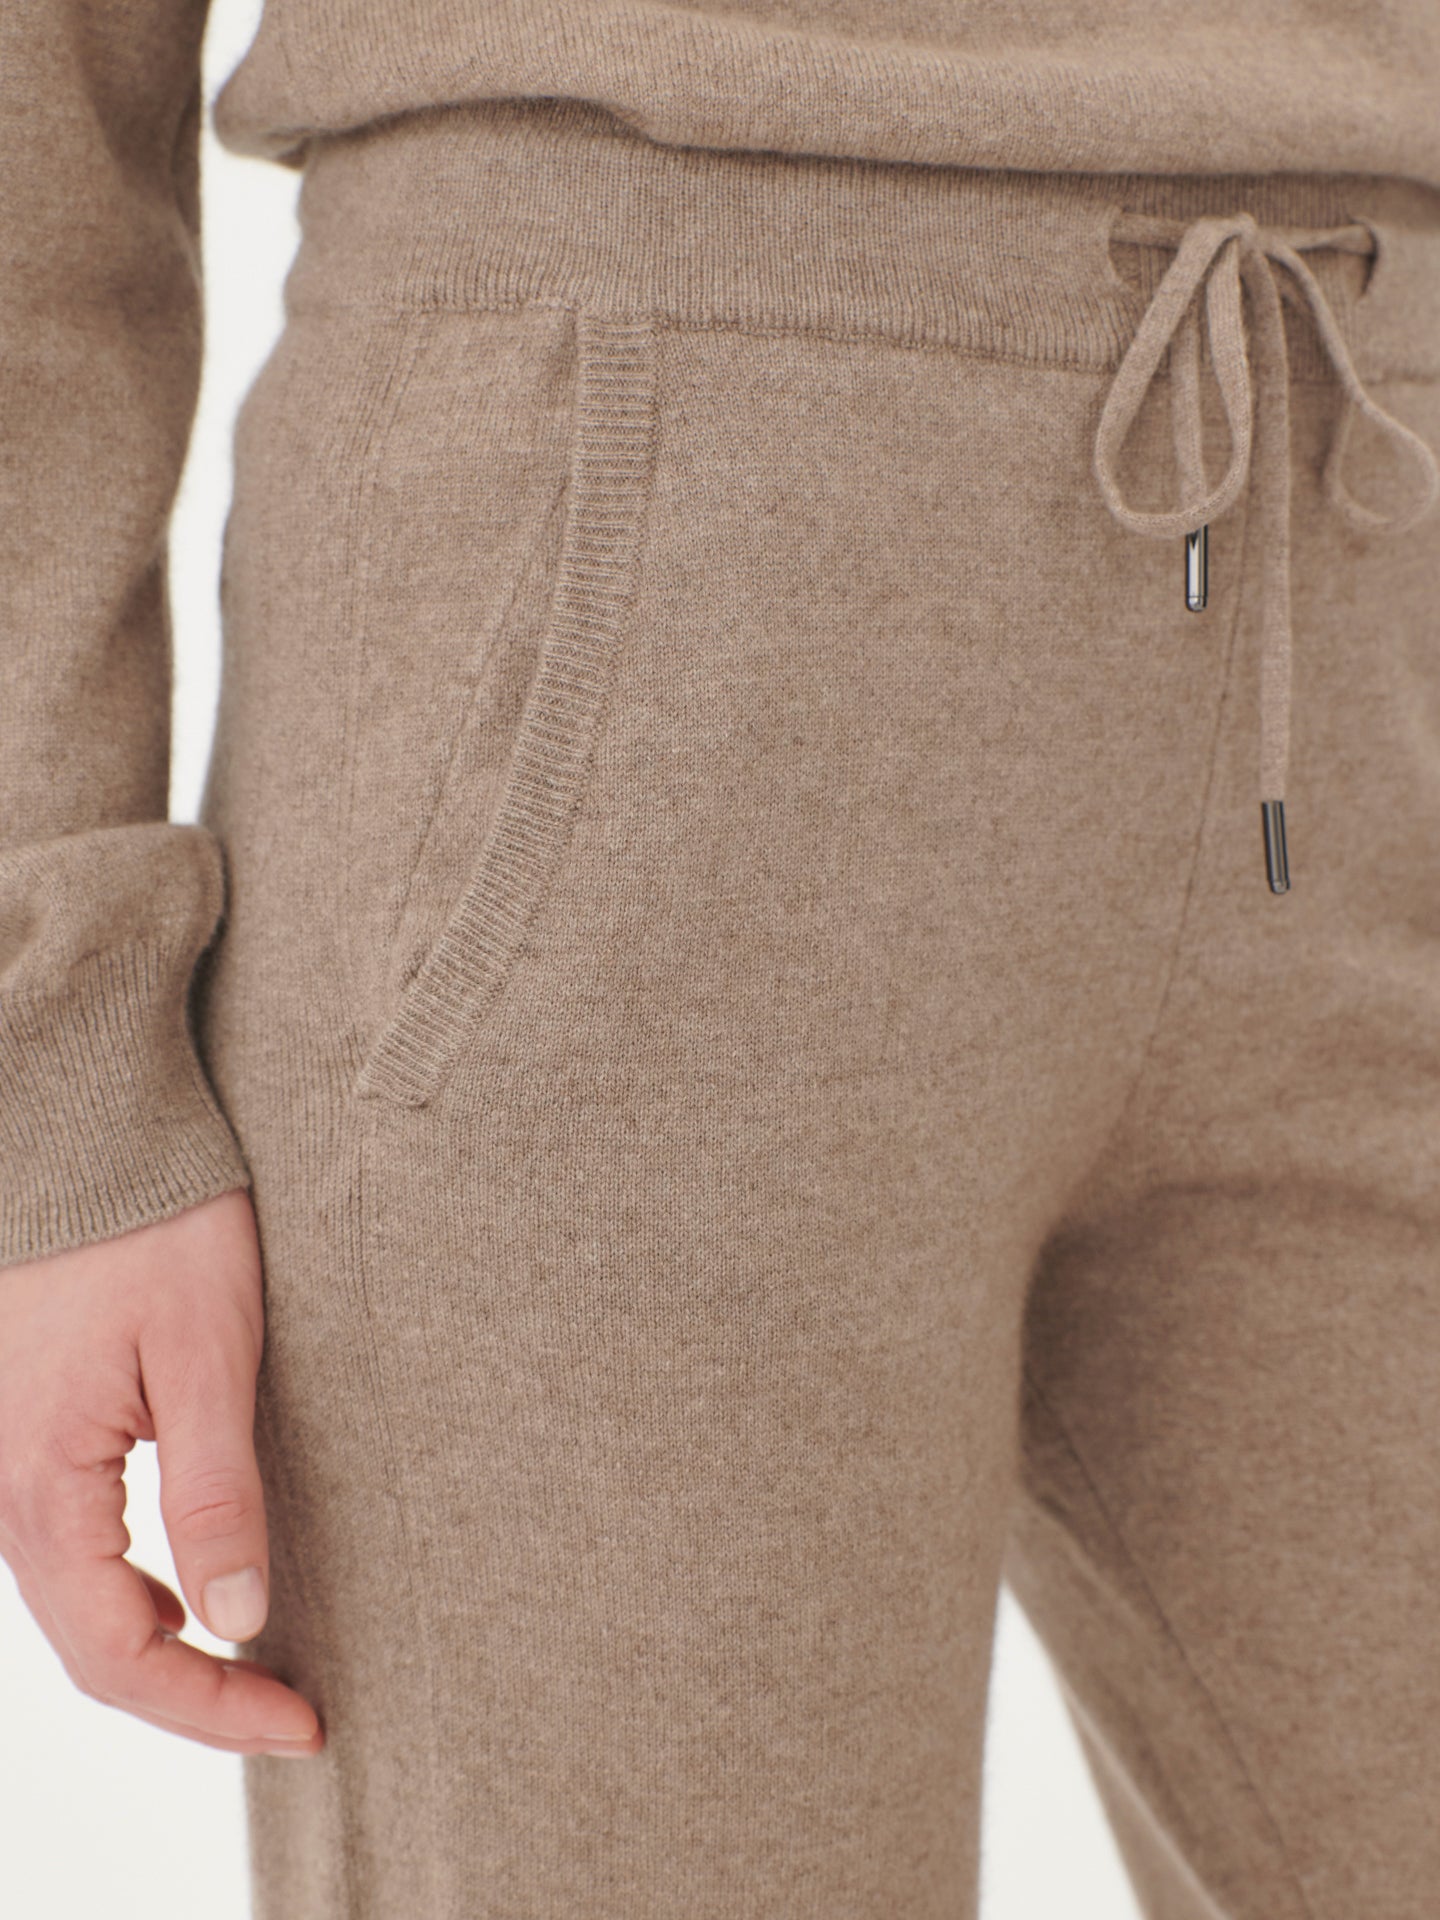 Sempione Taupe Lightweight Performance Jogger - Custom Fit Pants